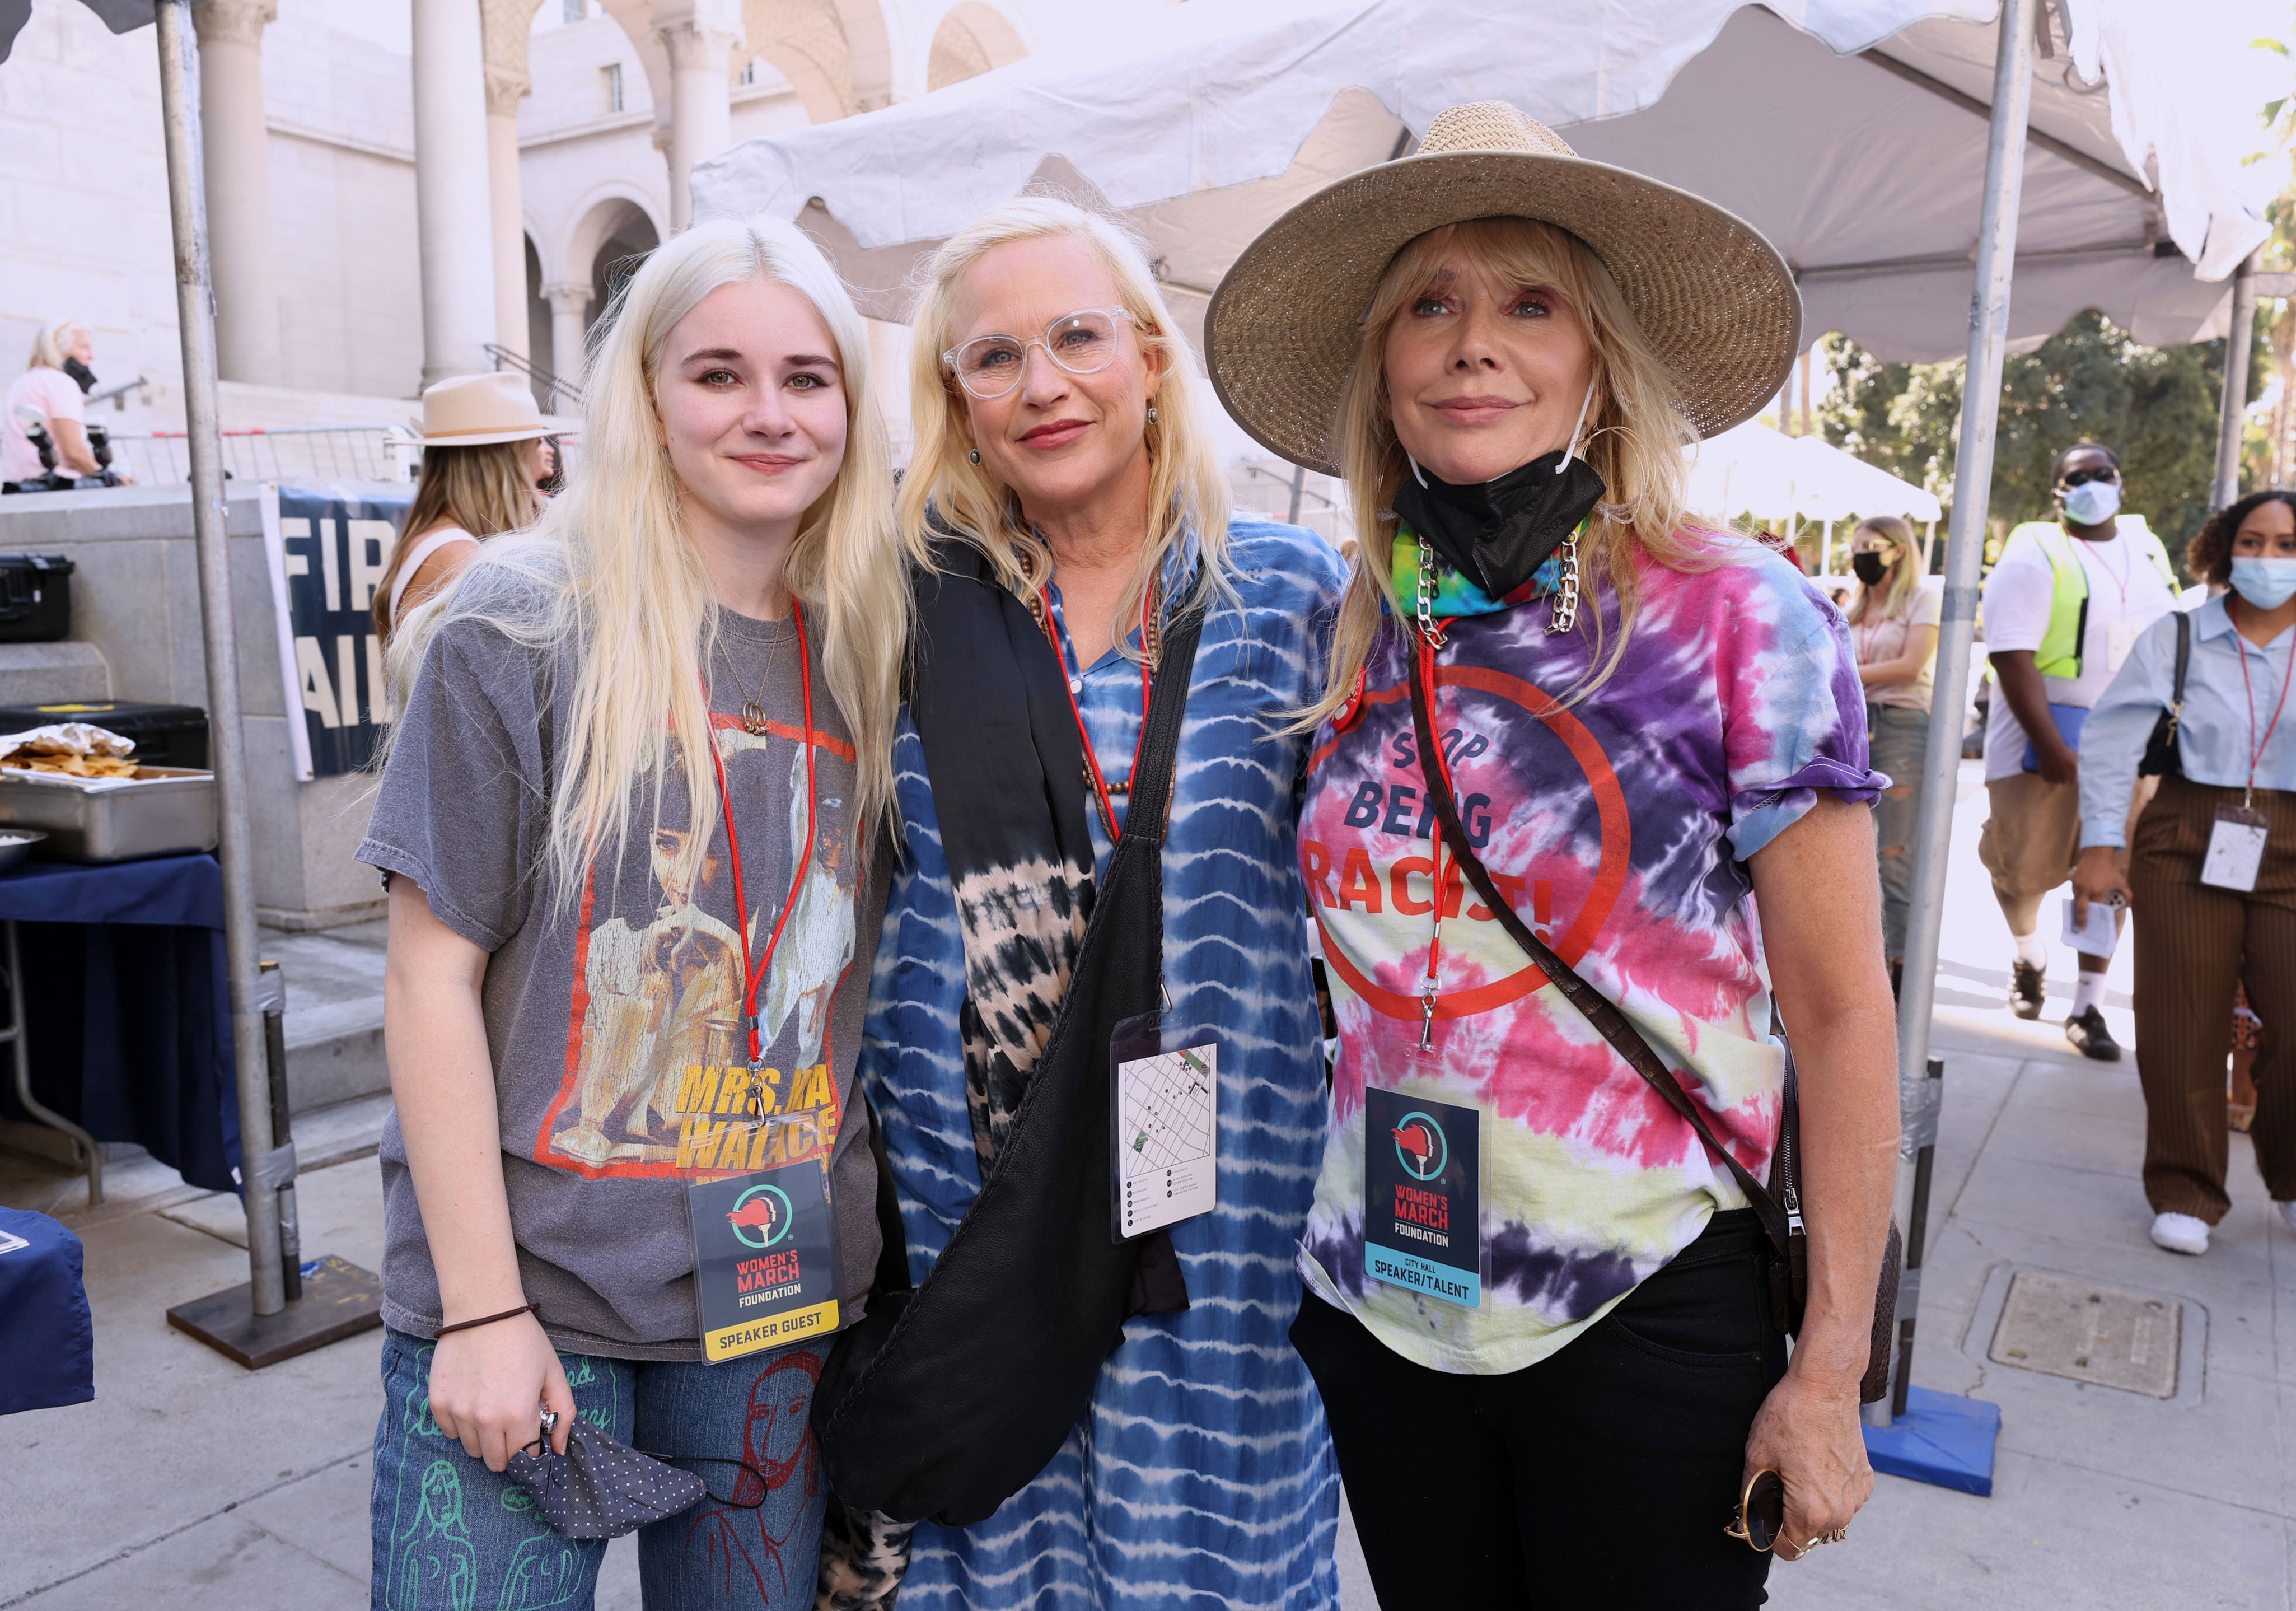 <p>Harlow Jane joined mom Patricia Arquette and aunt Rosanna Arquette at the "March 4 Reproductive Rights" at Pershing Square in Los Angeles on Oct. 2, 2021.</p>